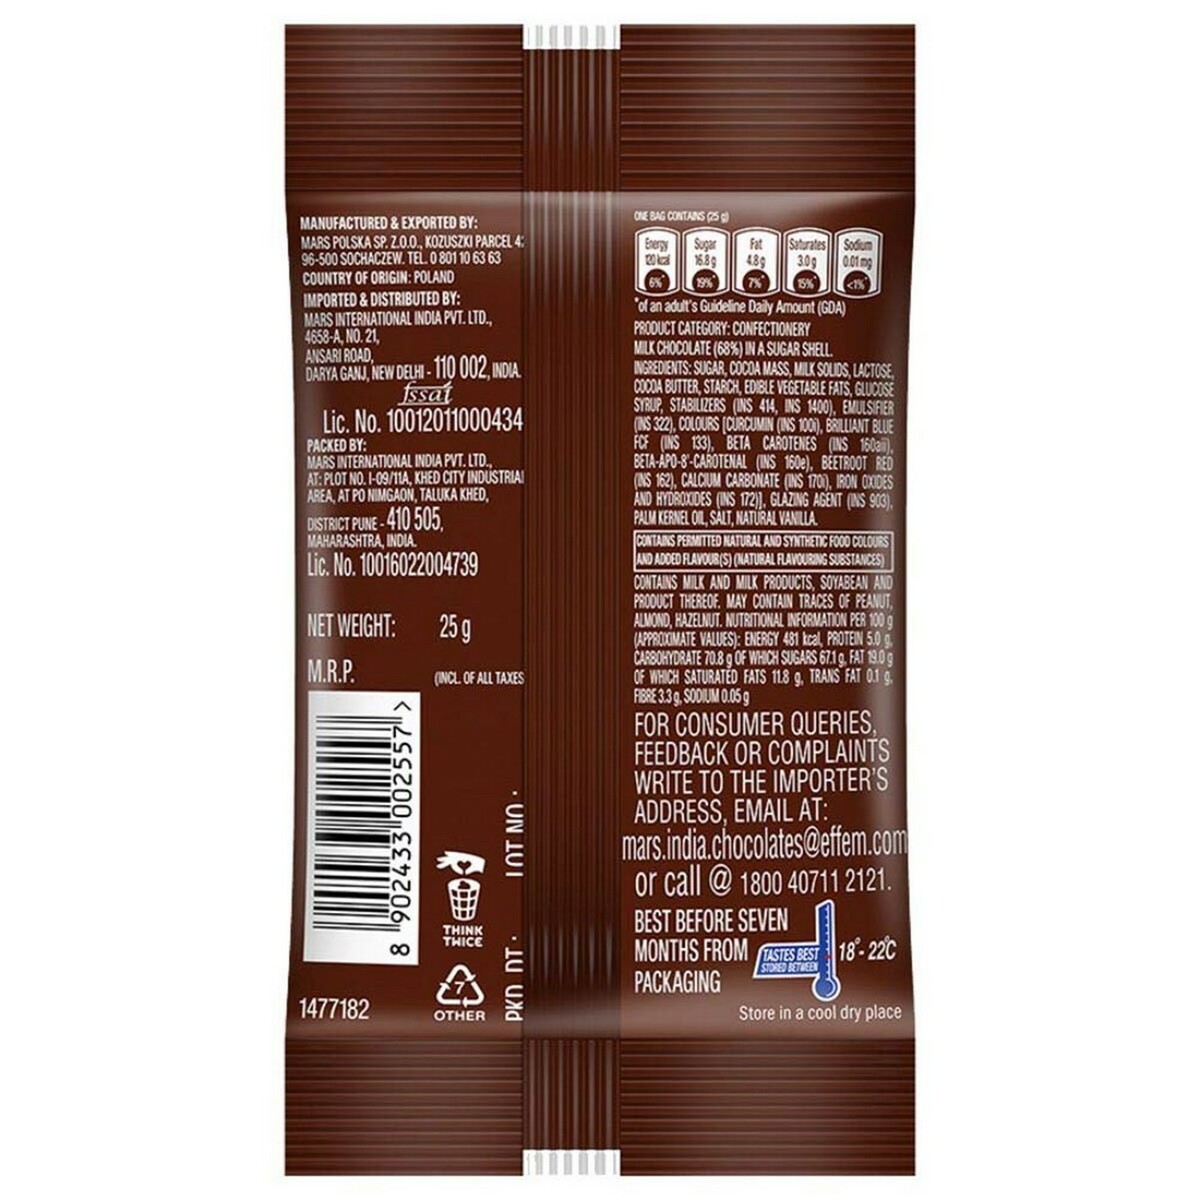 M&M's Chocolate 25g Pouch